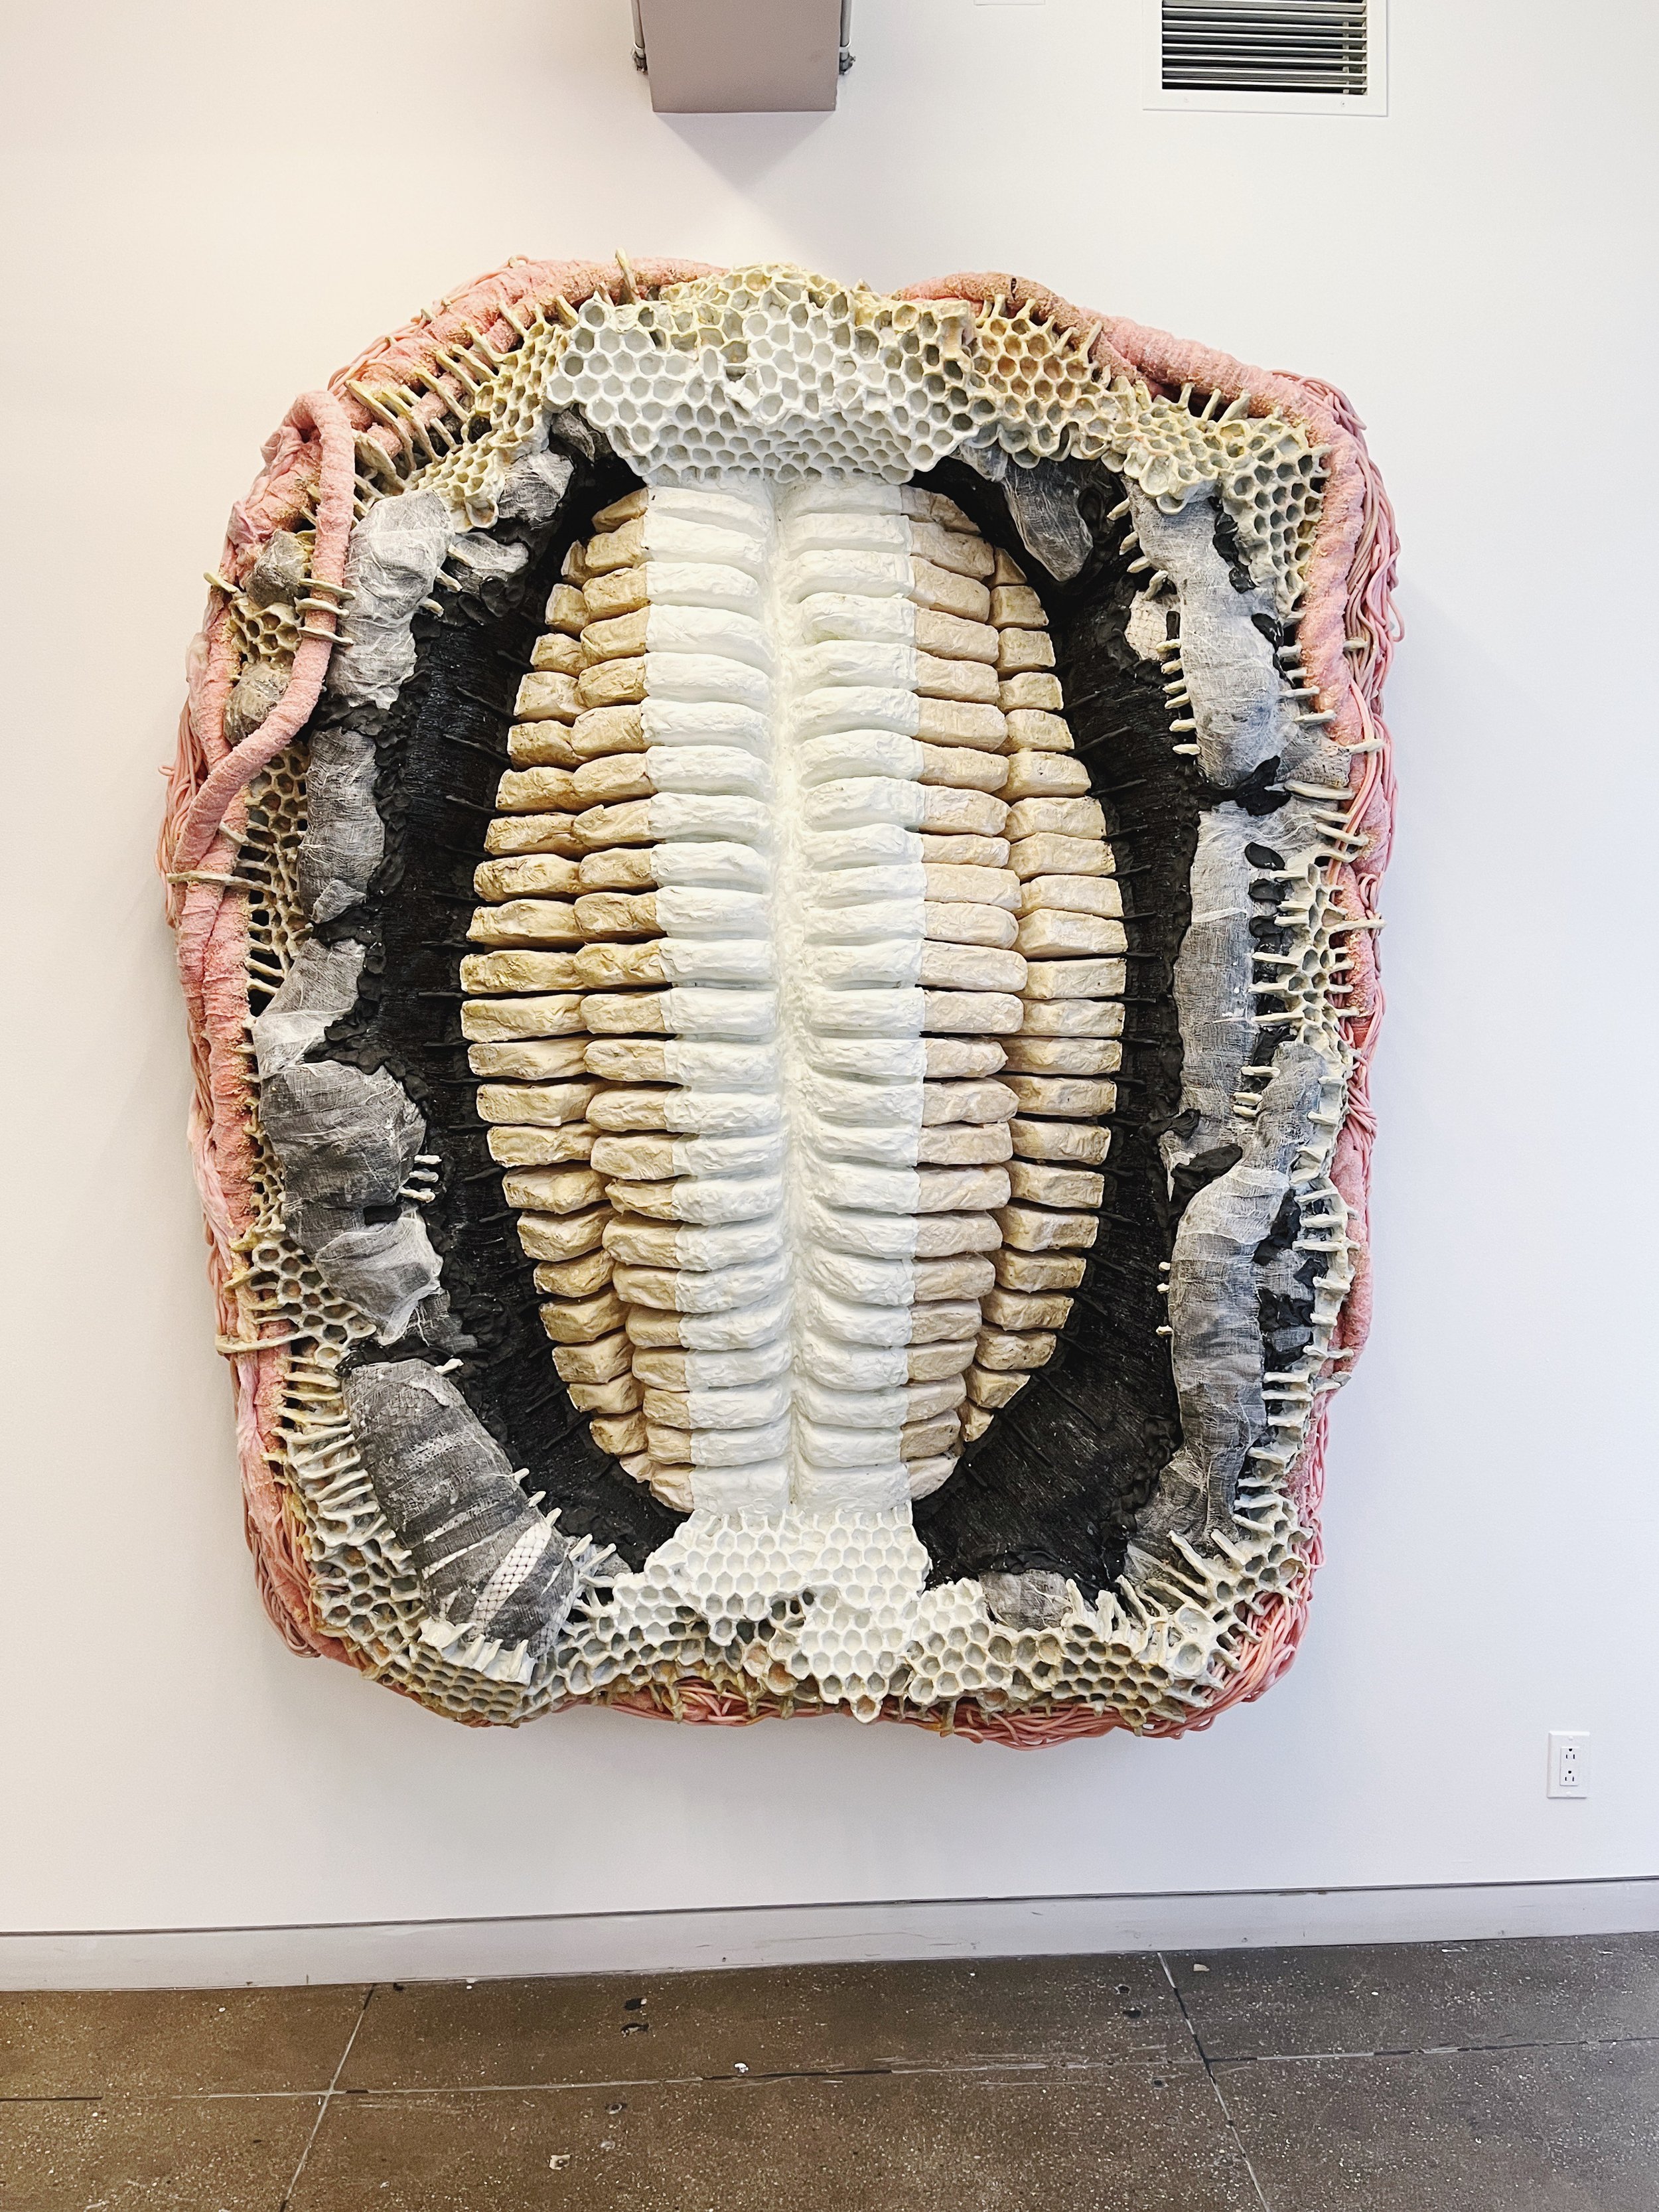   Whitney Oldenburg   holding 800  2022 Resin, foam, clay, personal belongings, ice trays, nets, rope, fabric, string, and paint 7 x 6 x 1 feet 